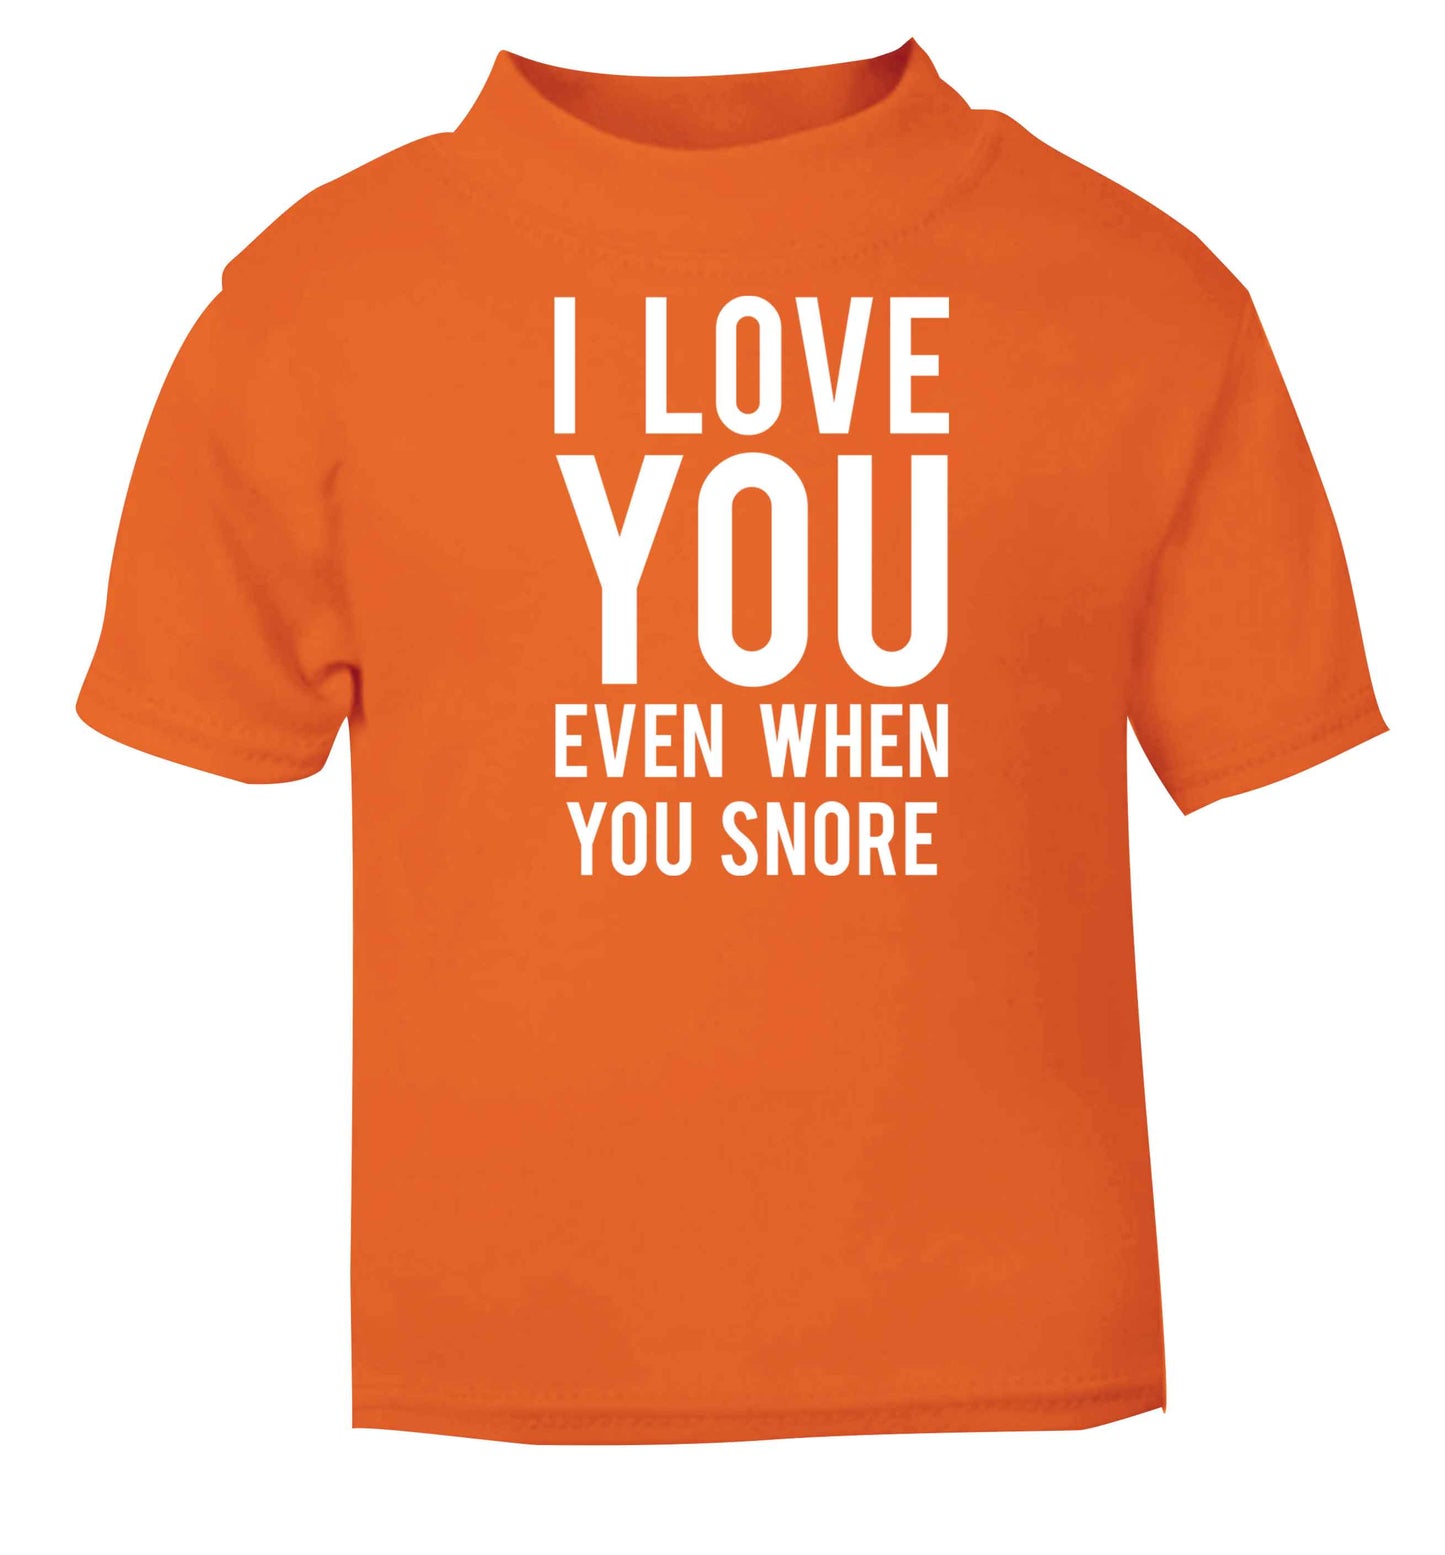 I love you even when you snore orange baby toddler Tshirt 2 Years